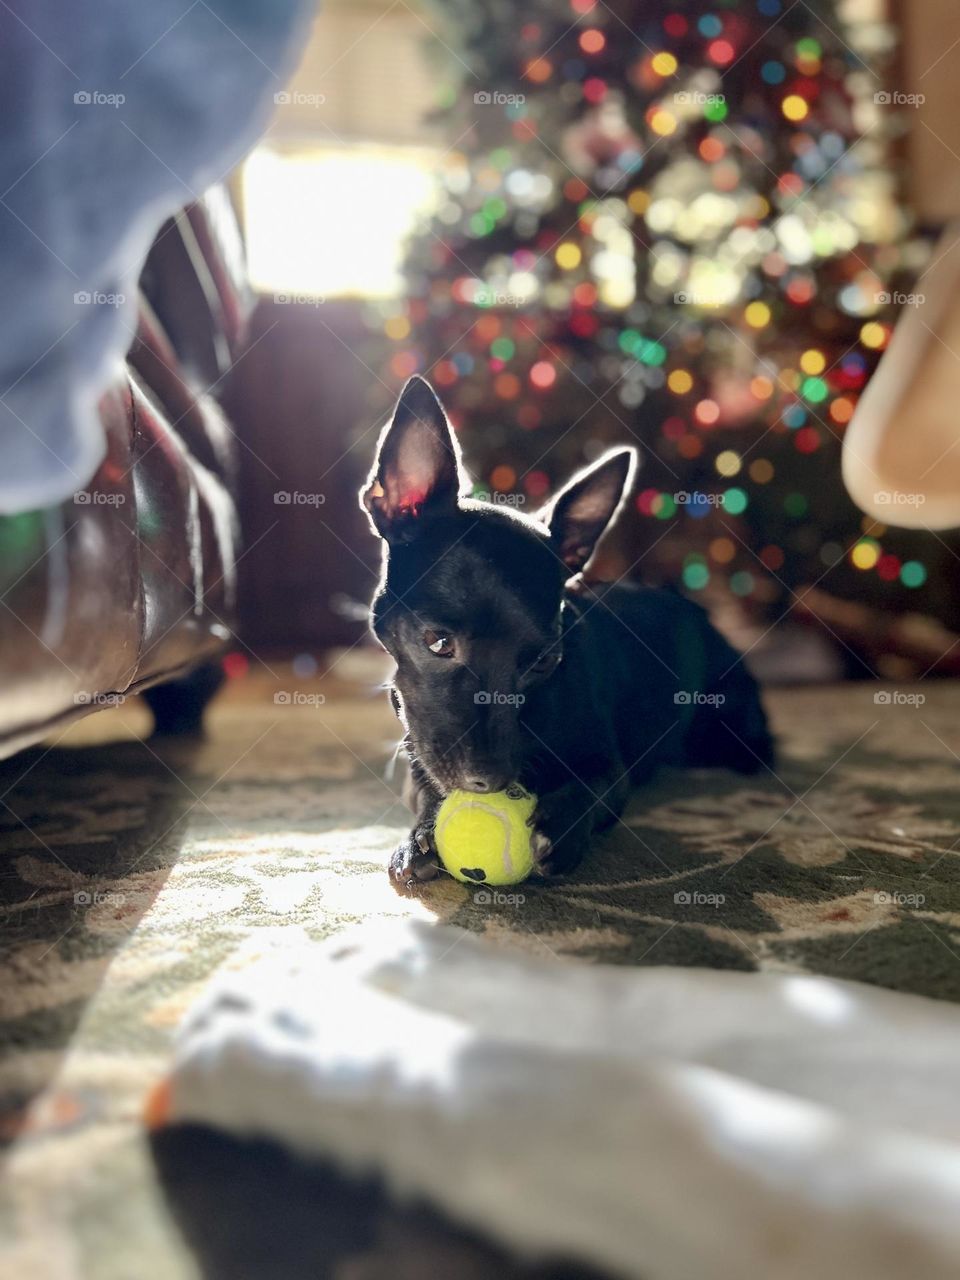 Tiny black dog lying on rug playing with a small yellow ball. The low angle view highlights the sun streaming in the window, and colorful Christmas tree out of focus on the background. A larger dog’s paws barely visible in the immediate foreground 